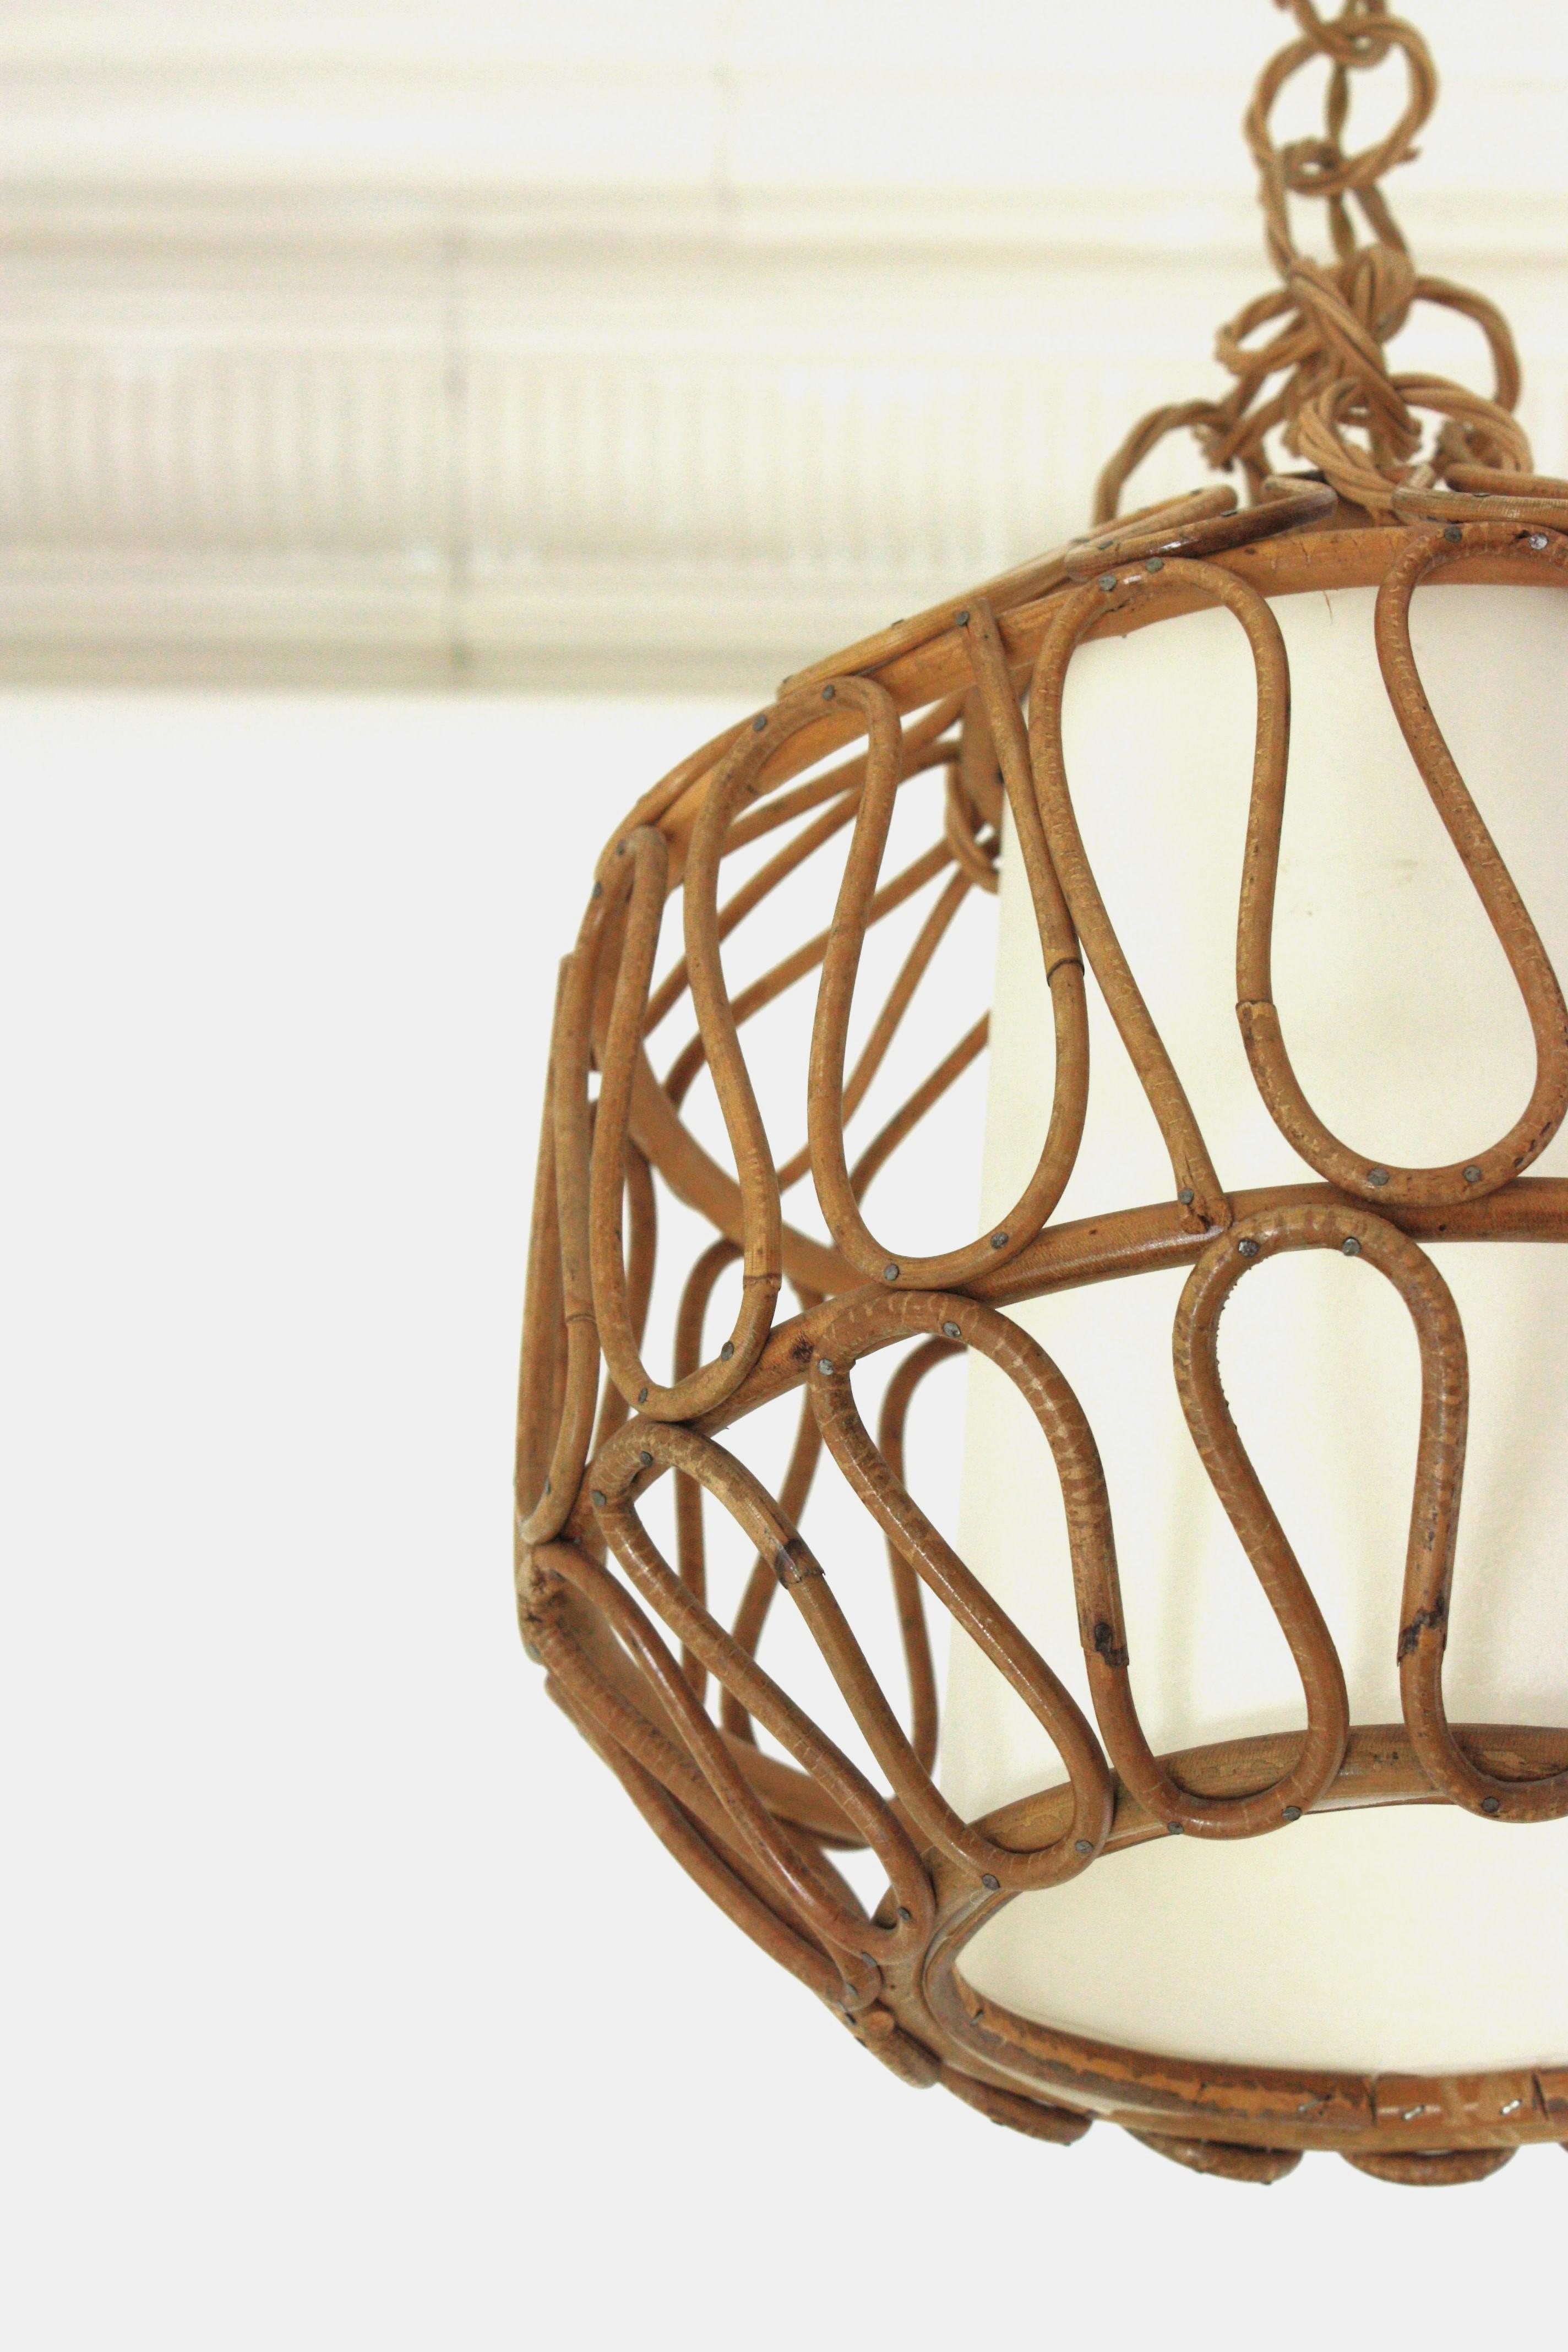 Rattan Globe Pendant Light or Lantern with Loop Details, Spain, 1960s For Sale 6